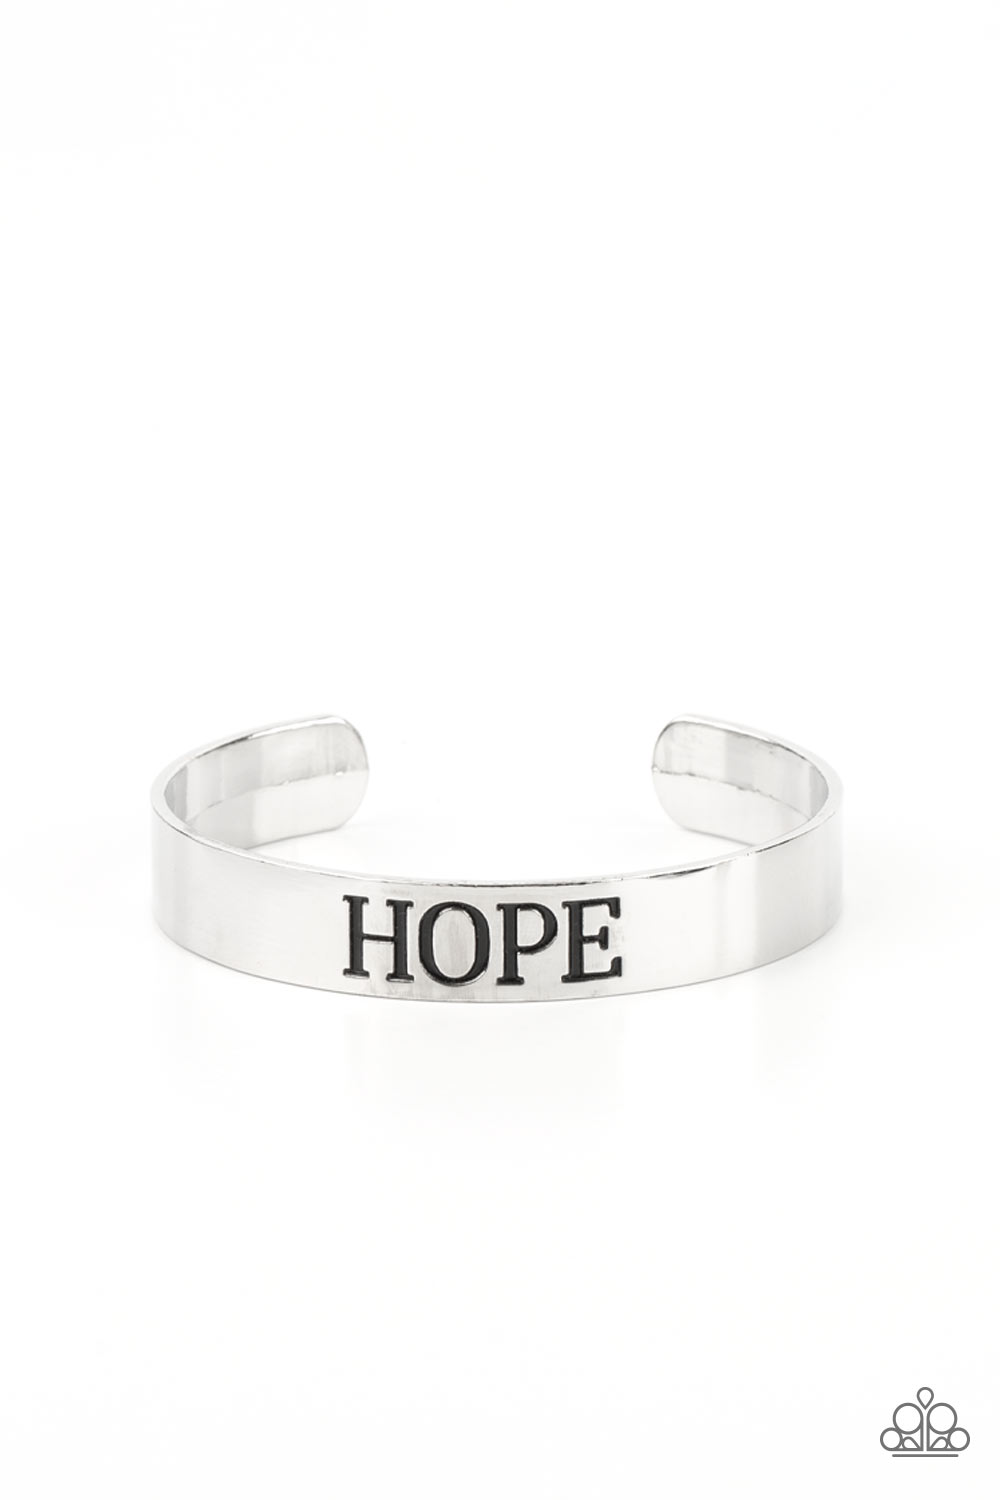 Hope Makes The World Go Round - Silver